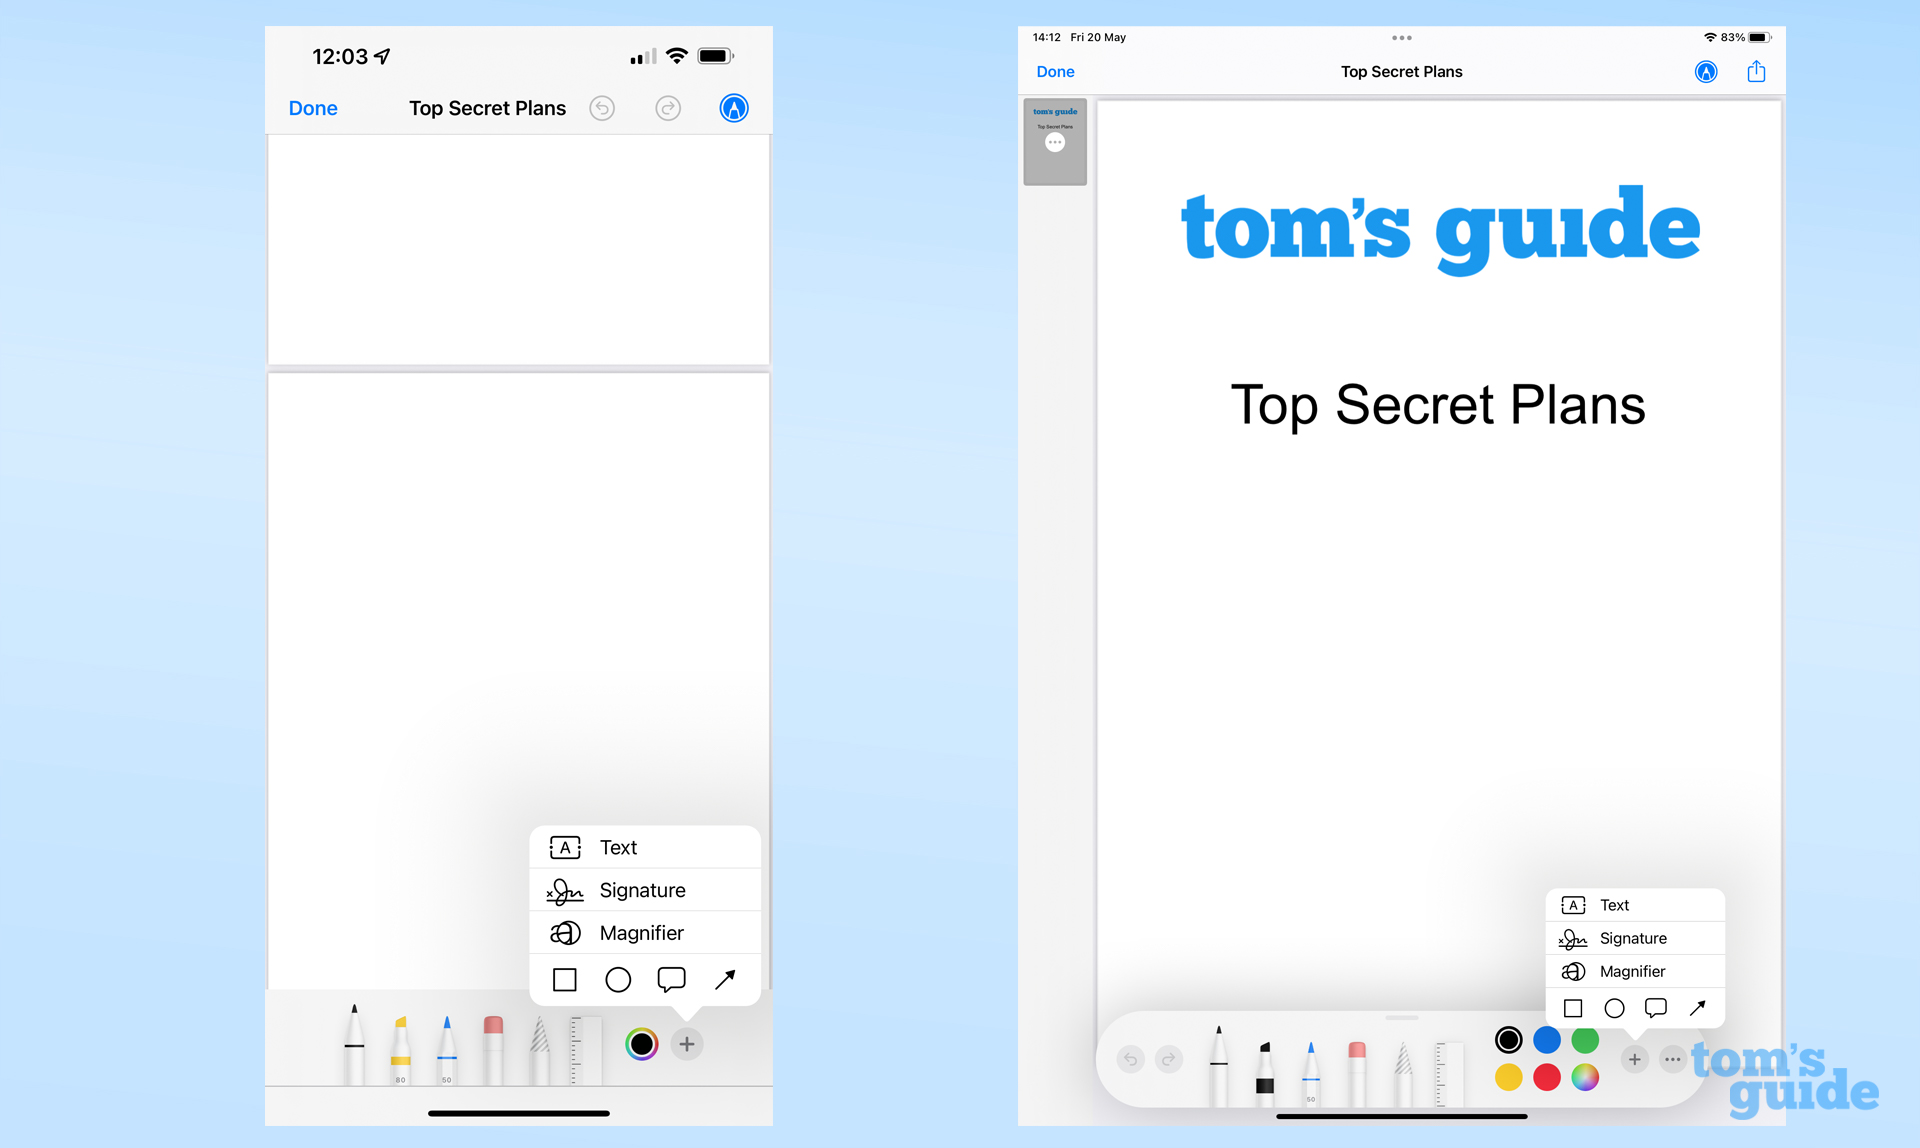 A screenshot from an iPhone and an iPad side-by-side, showing additional Markup tools